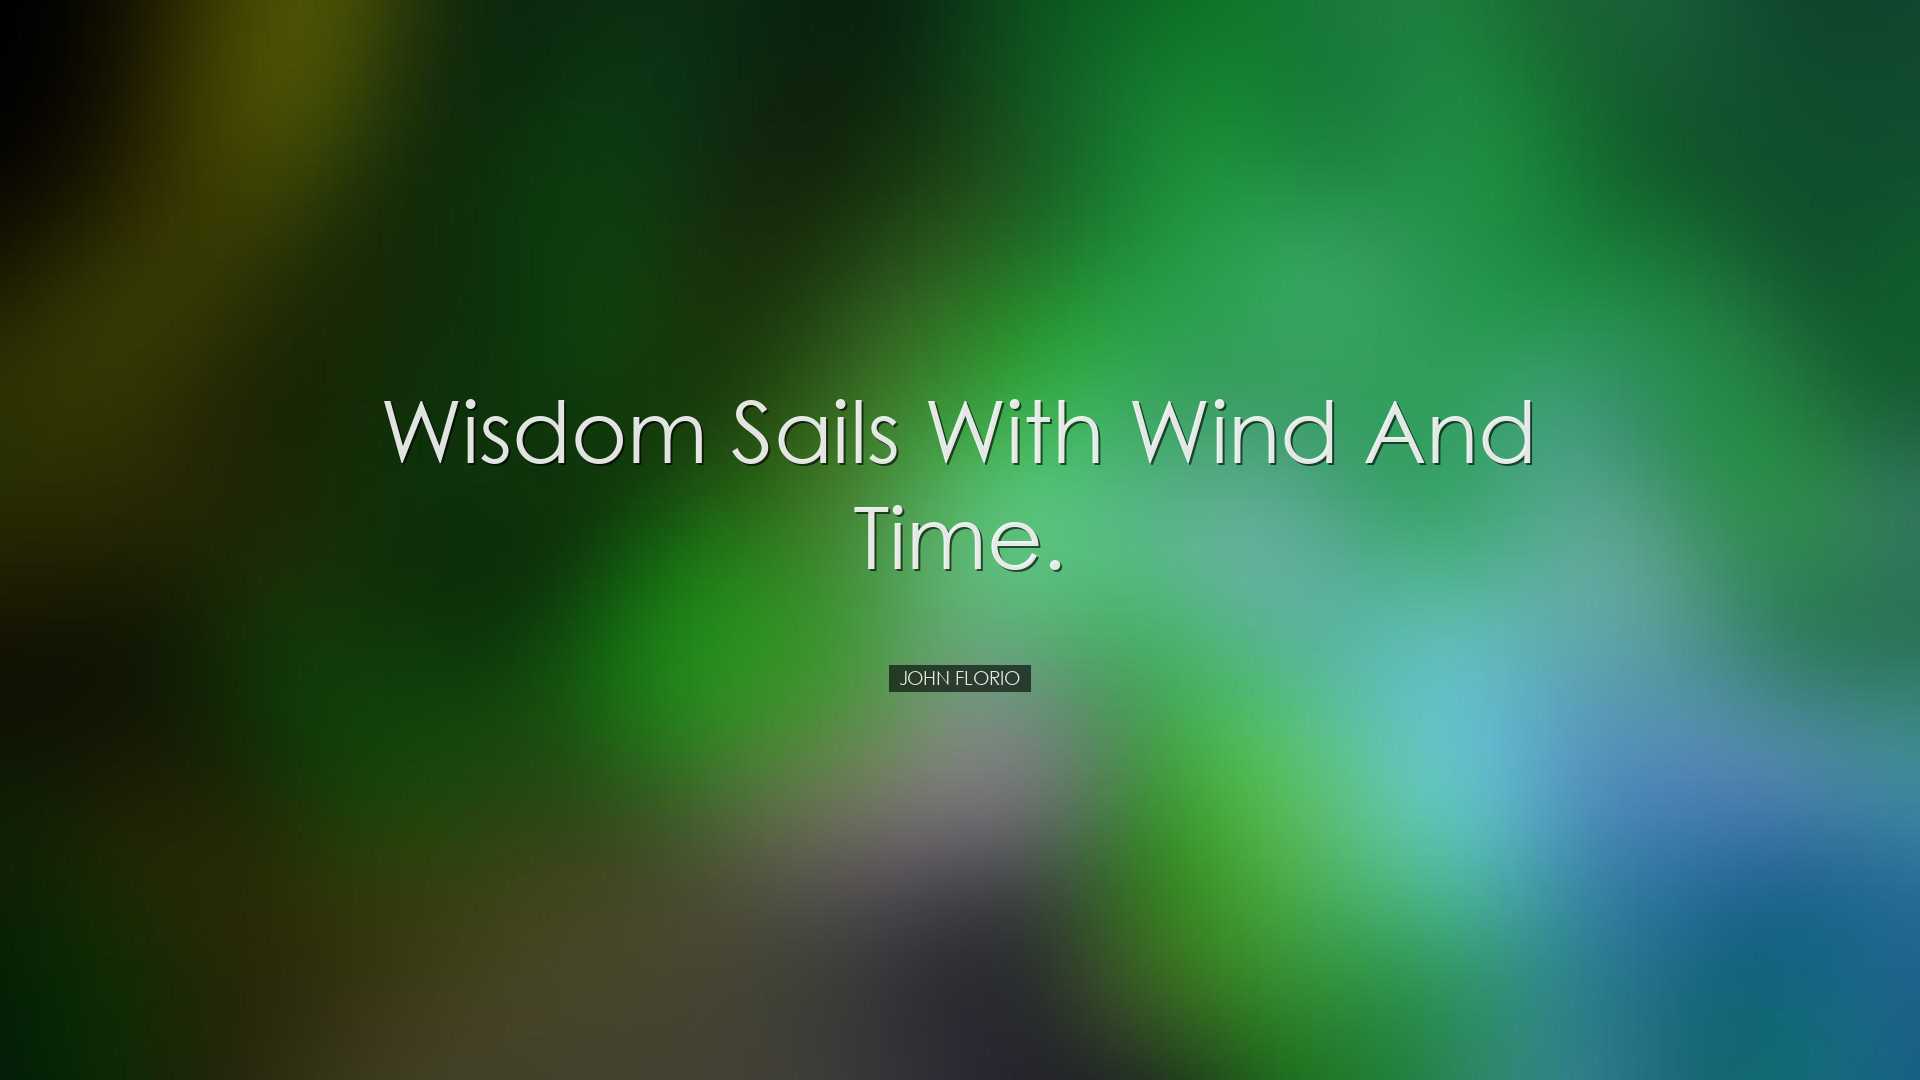 Wisdom sails with wind and time. - John Florio